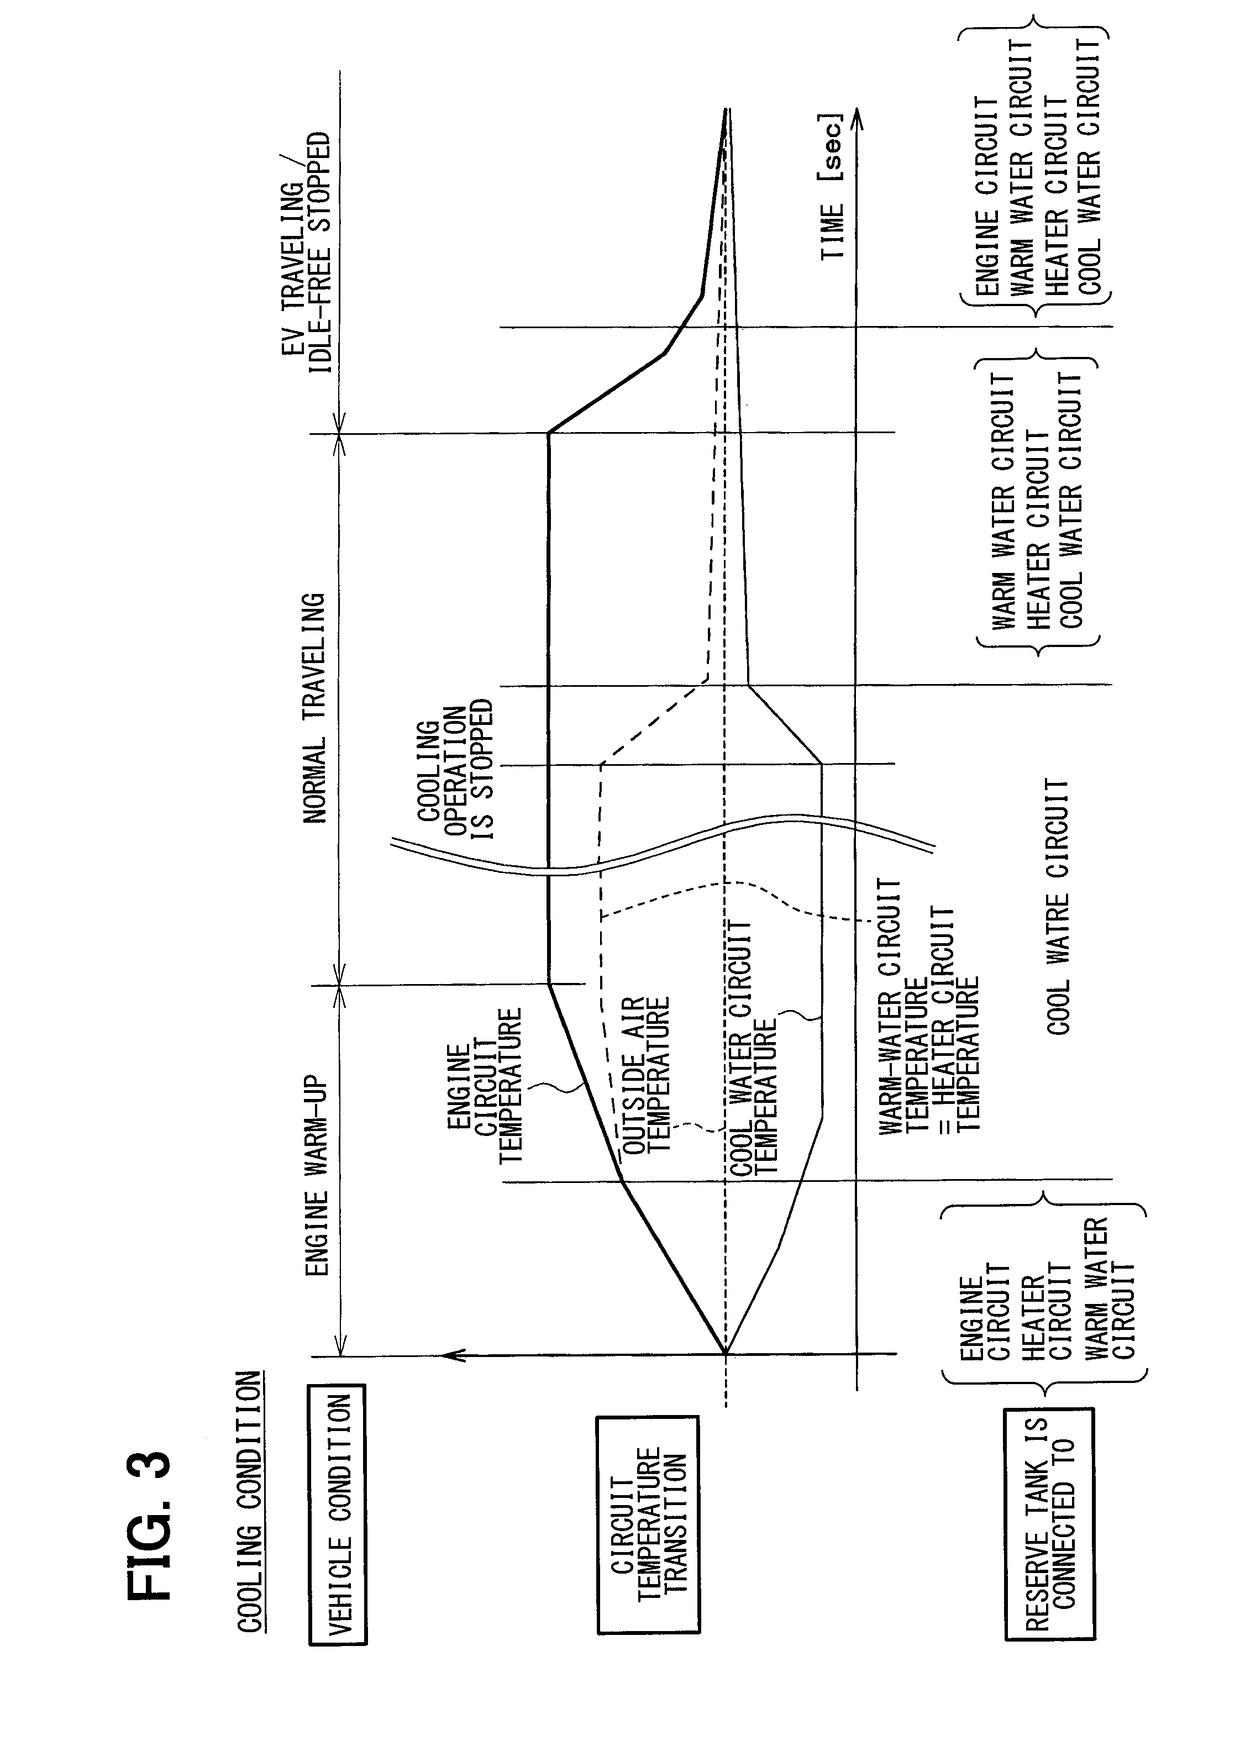 Thermal management device for vehicle